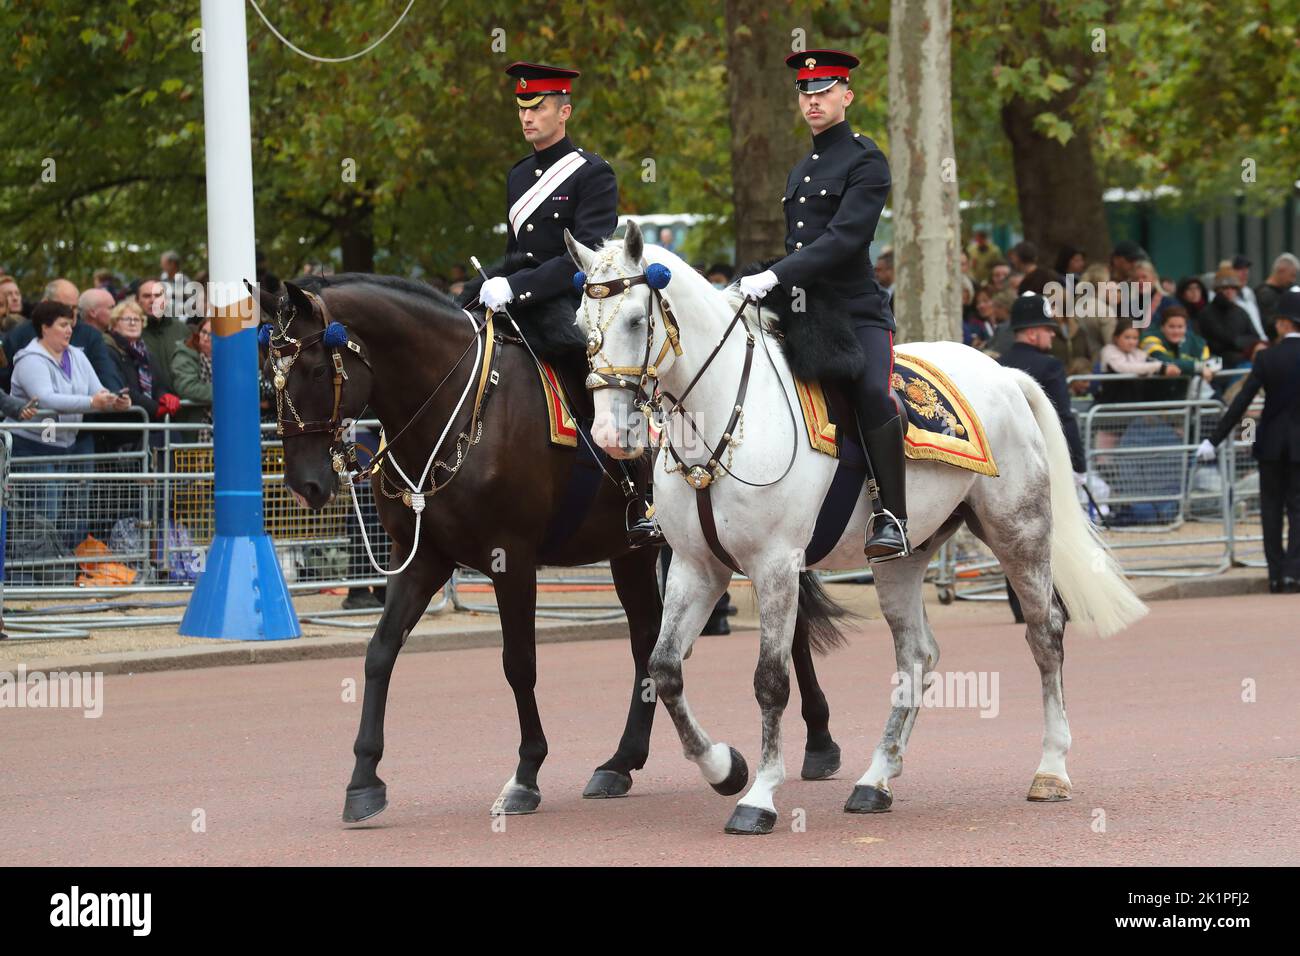 The Mall is ready and secured for Queen Elizabeth II funeral procession. Soldiers on horseback on The Mall, London, UK Stock Photo